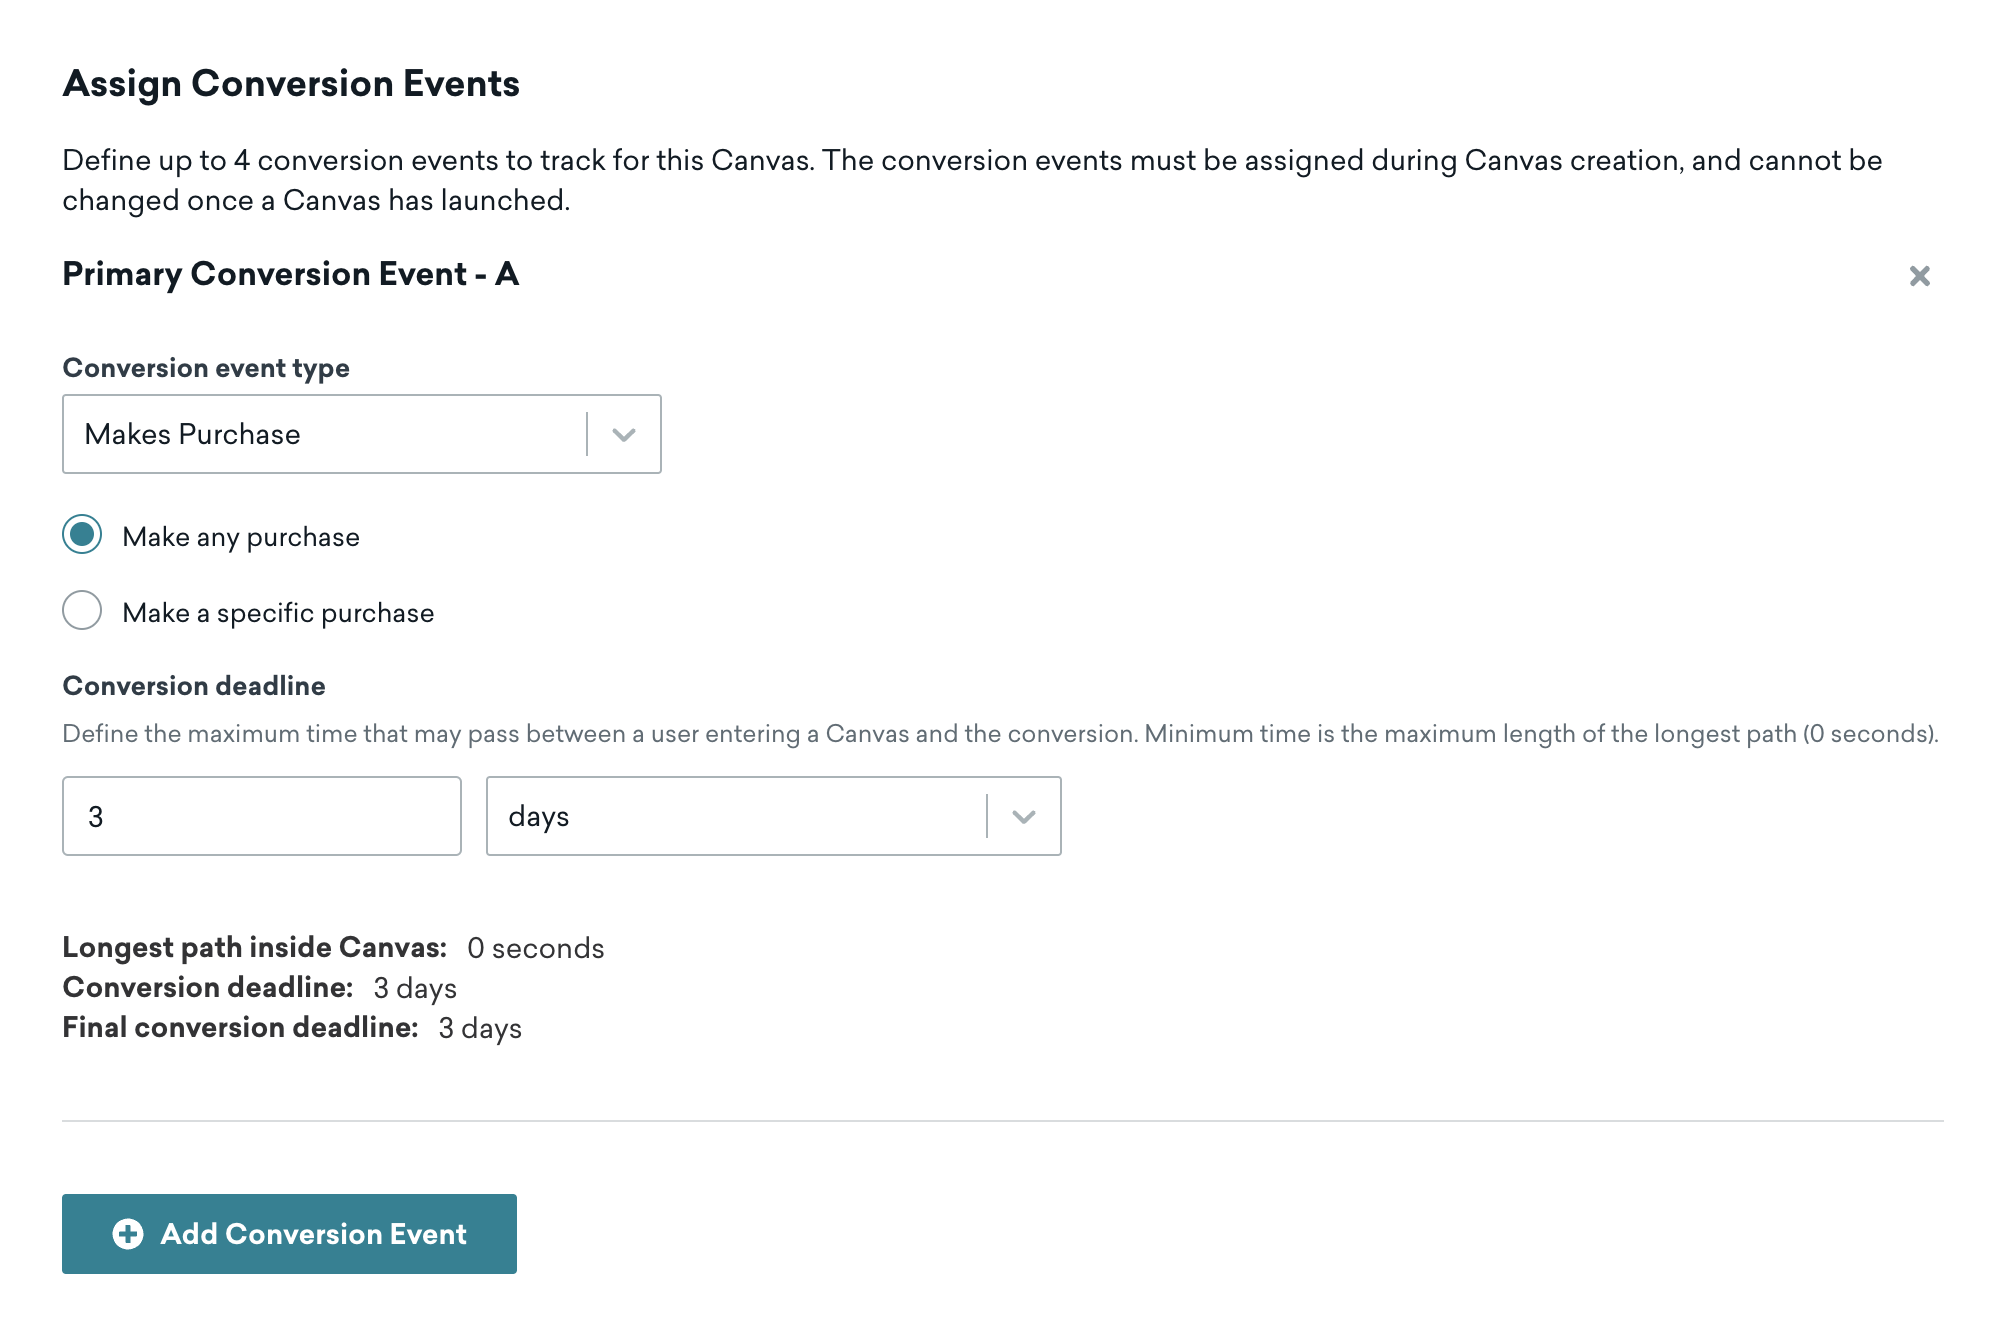 Primary Conversion Event A with the Makes Purchase conversion event type to record conversations for users who make any purchase within a three day conversion deadline.